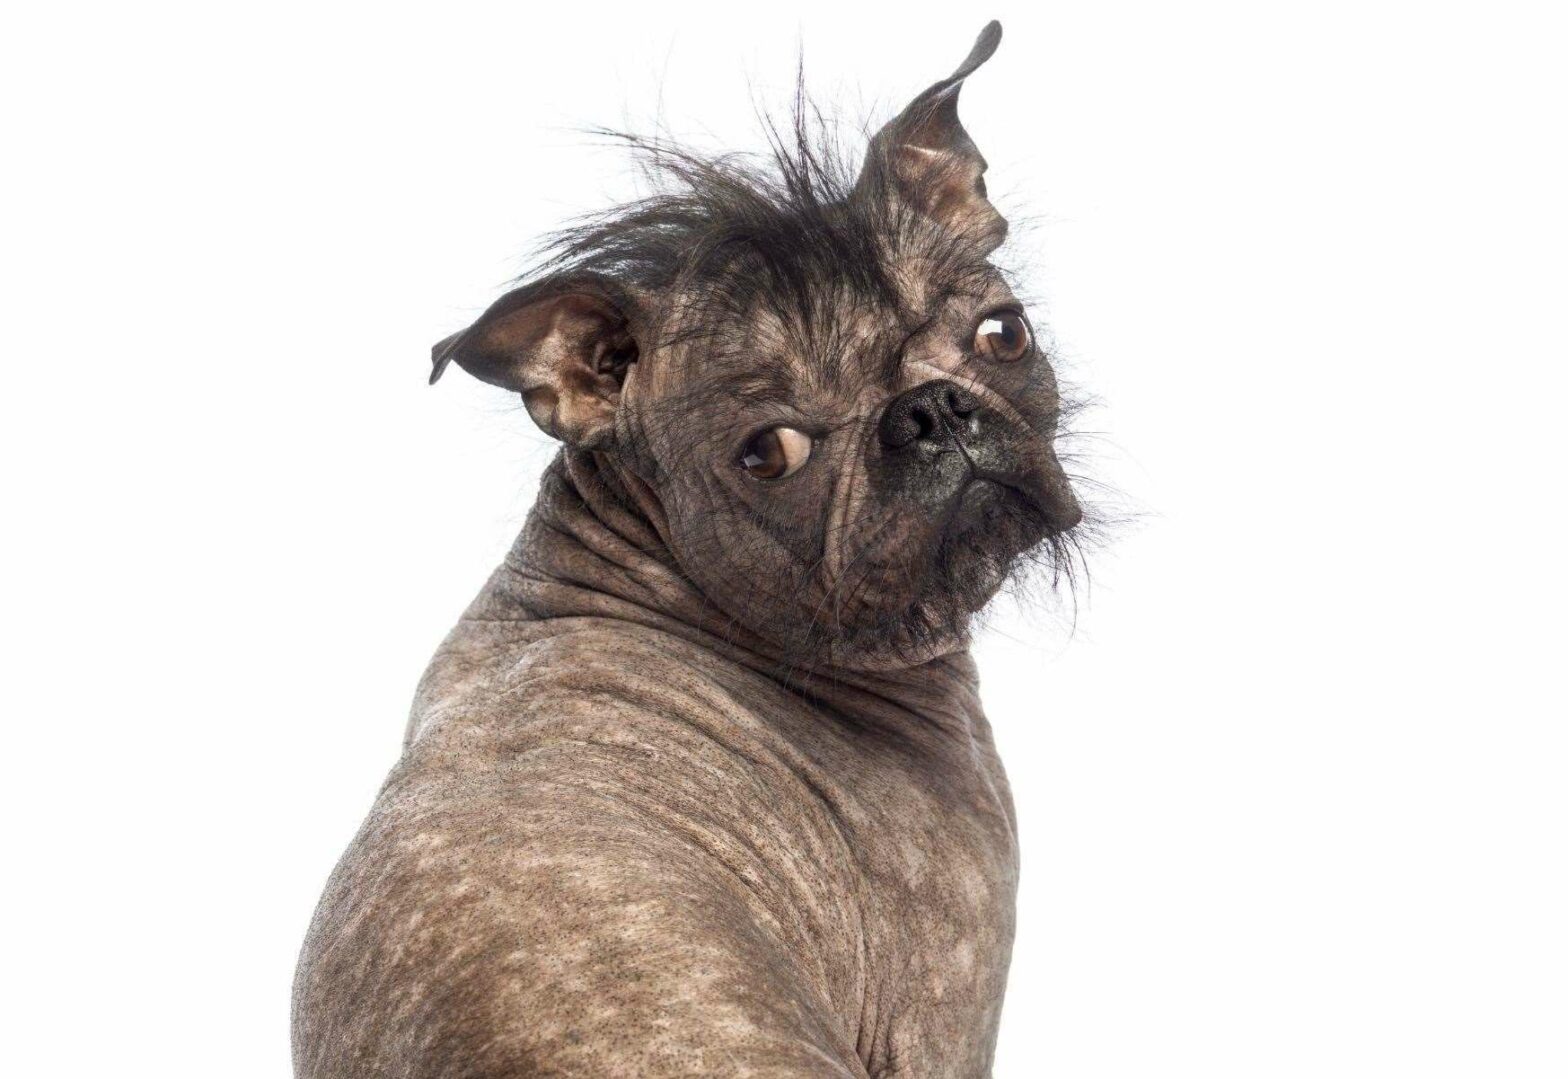 Photography company ParrotPrint.com is searching for the ugliest dog in all of the UK